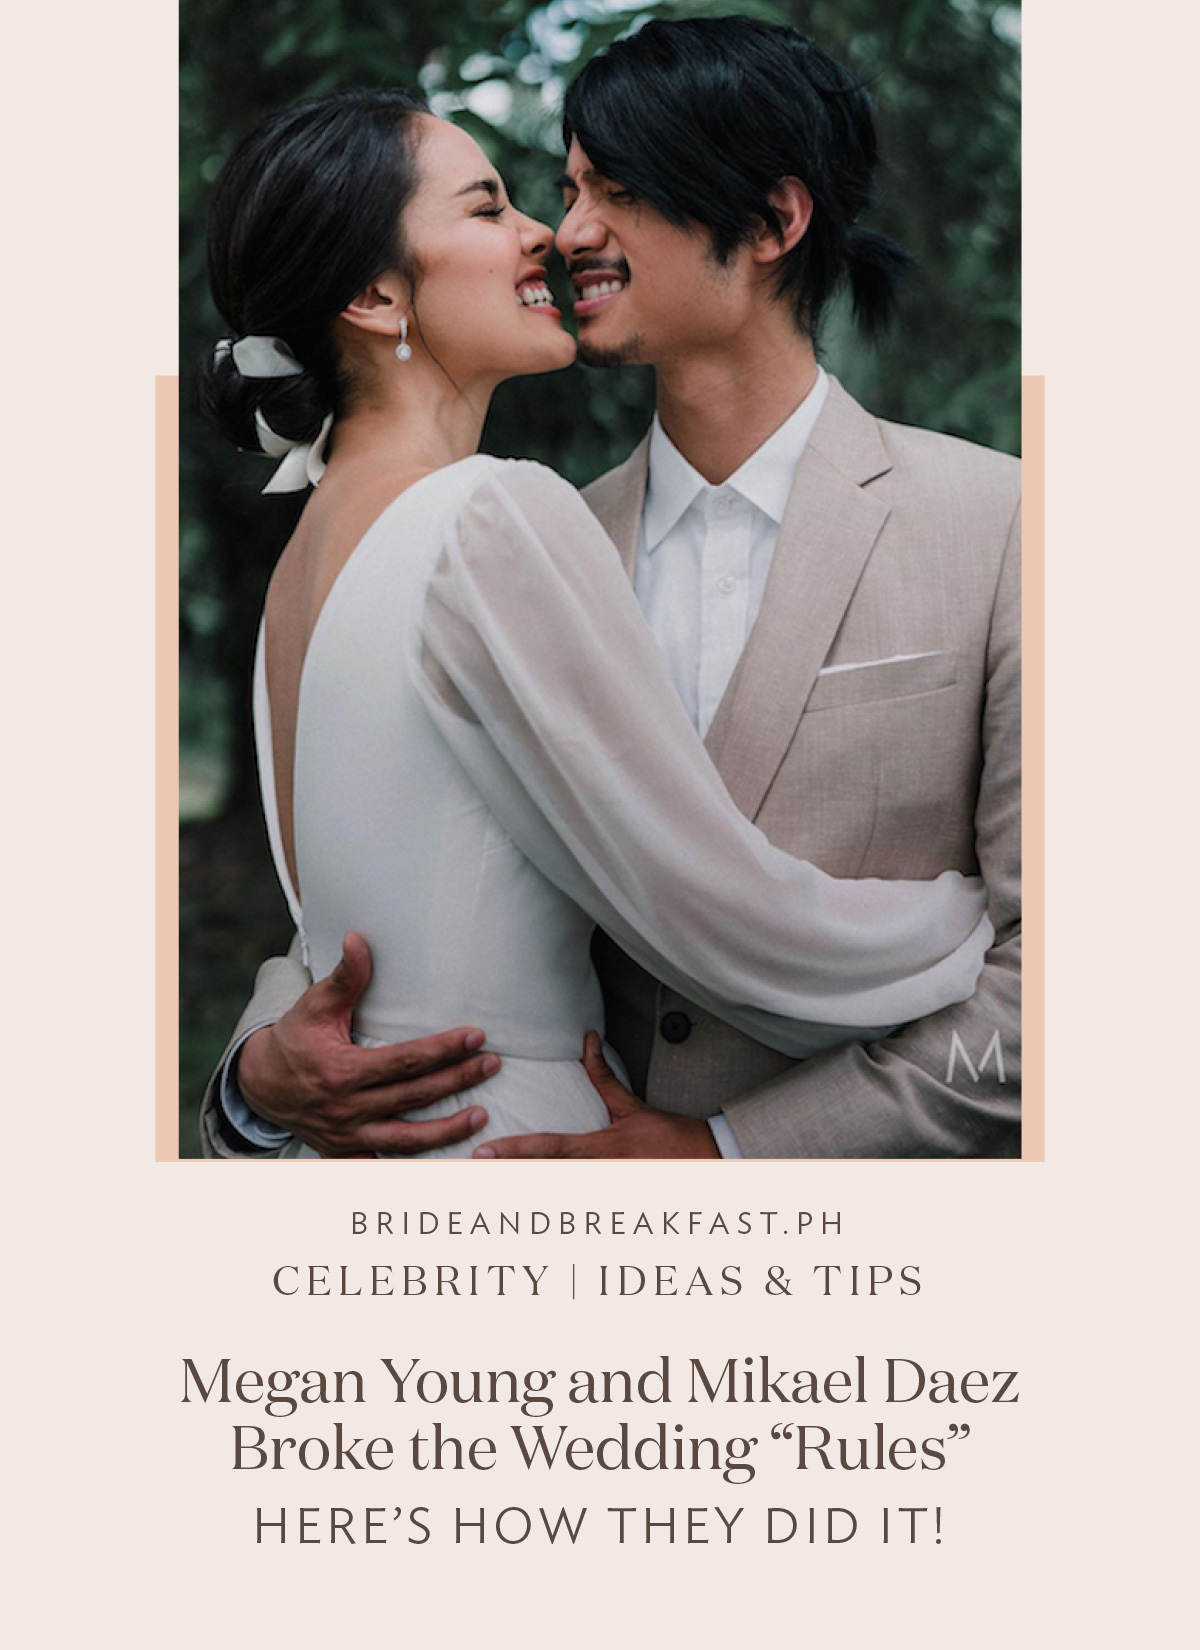 Megan Young and Mikael Daez Broke the Wedding "Rules". Here's How They Did It!